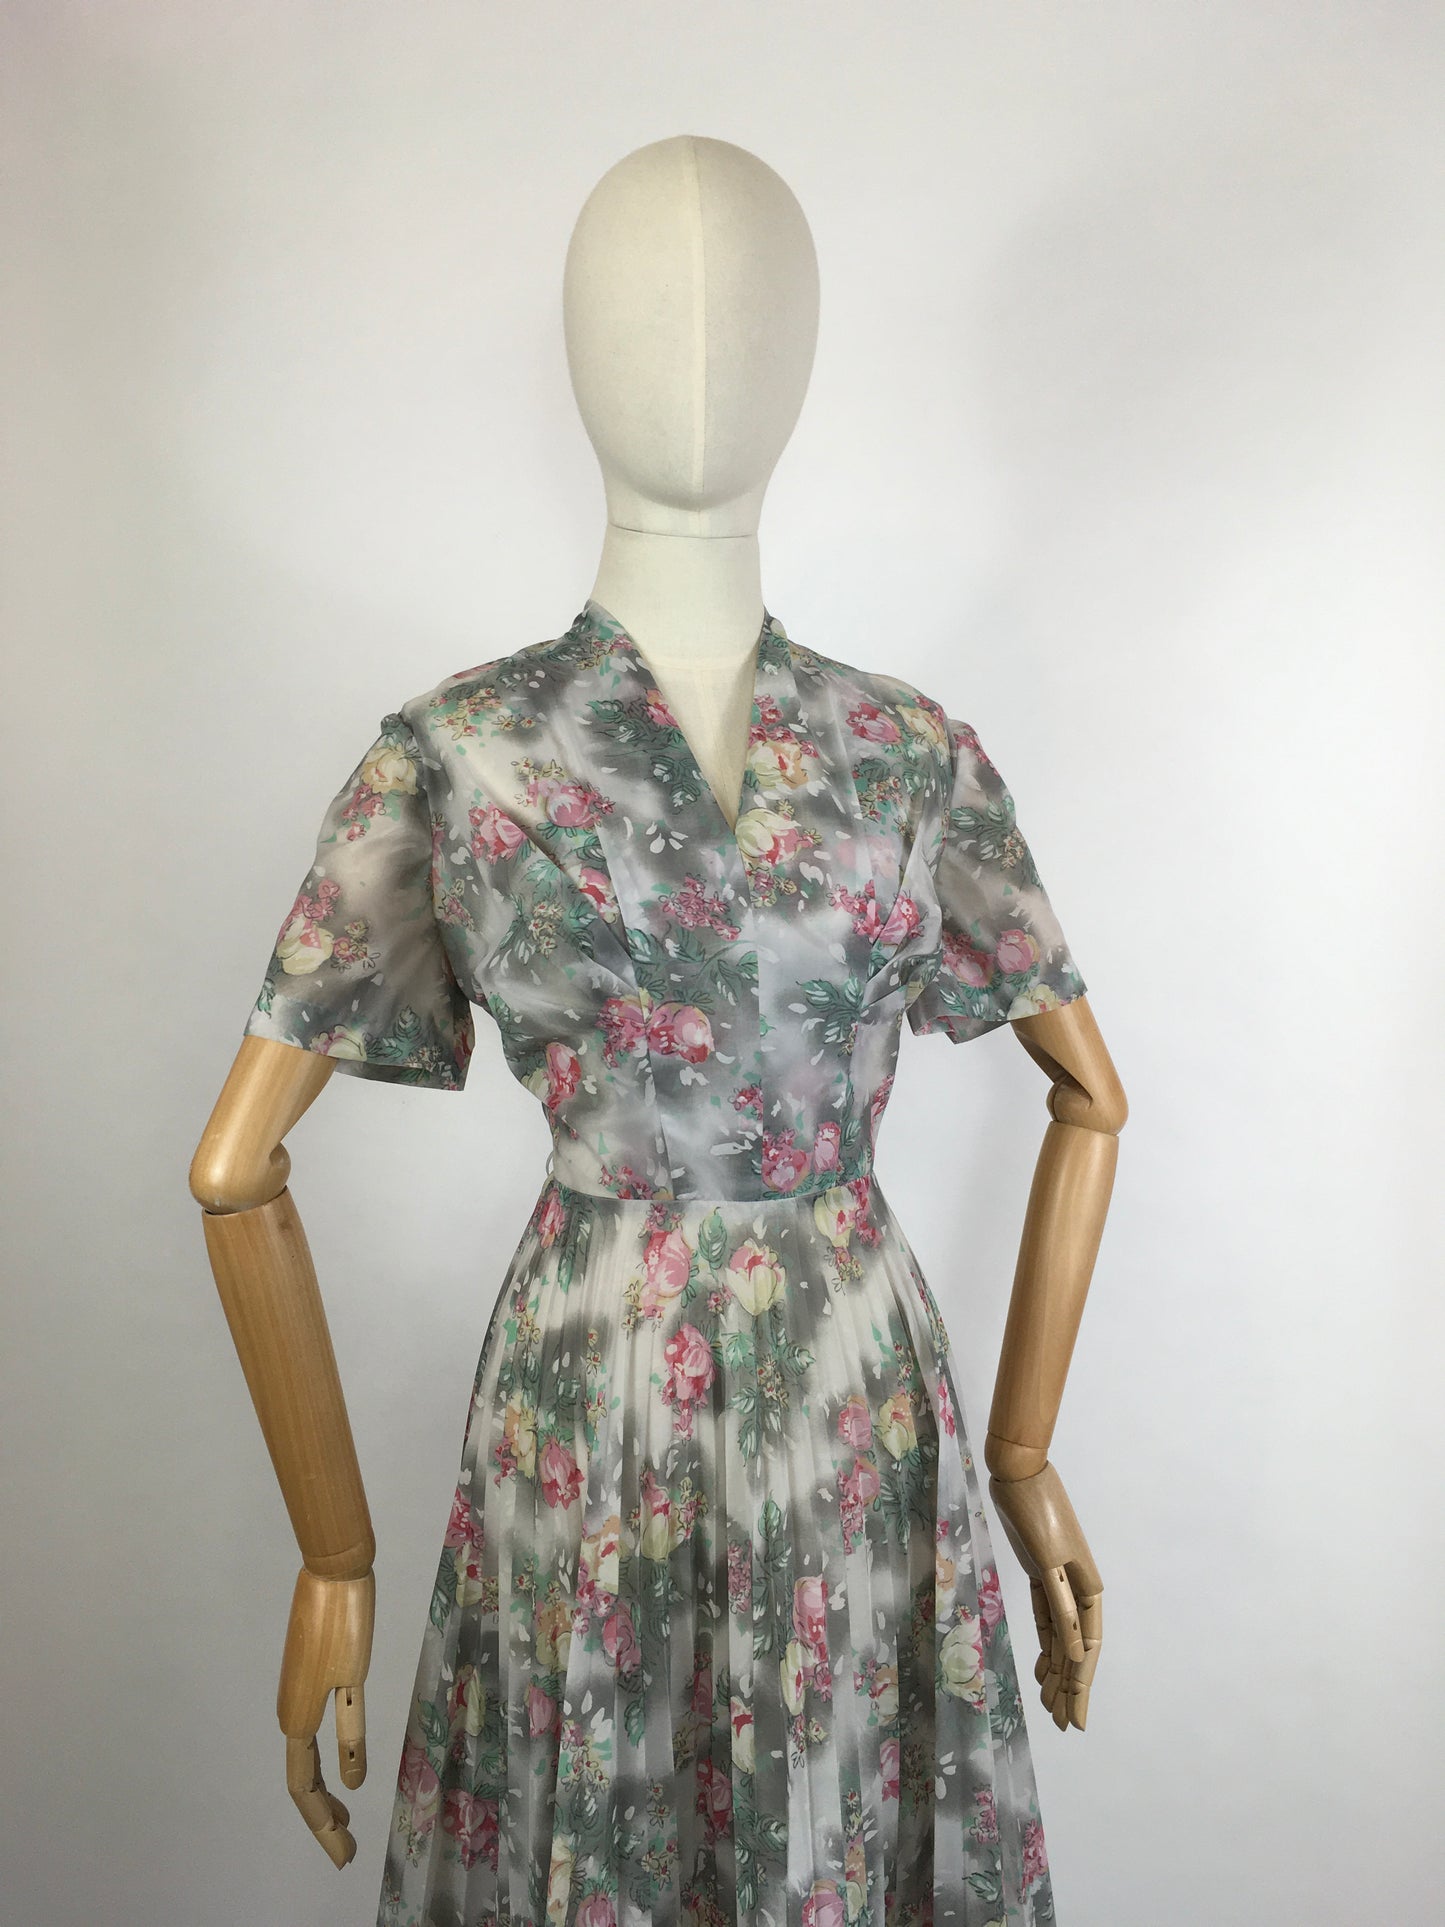 Original 1950s ‘ Eastex ‘ Floral Dress - In a Lovely Muted Colour Pallet of Soft Pinks, Muted Creams, Taupe and Greys